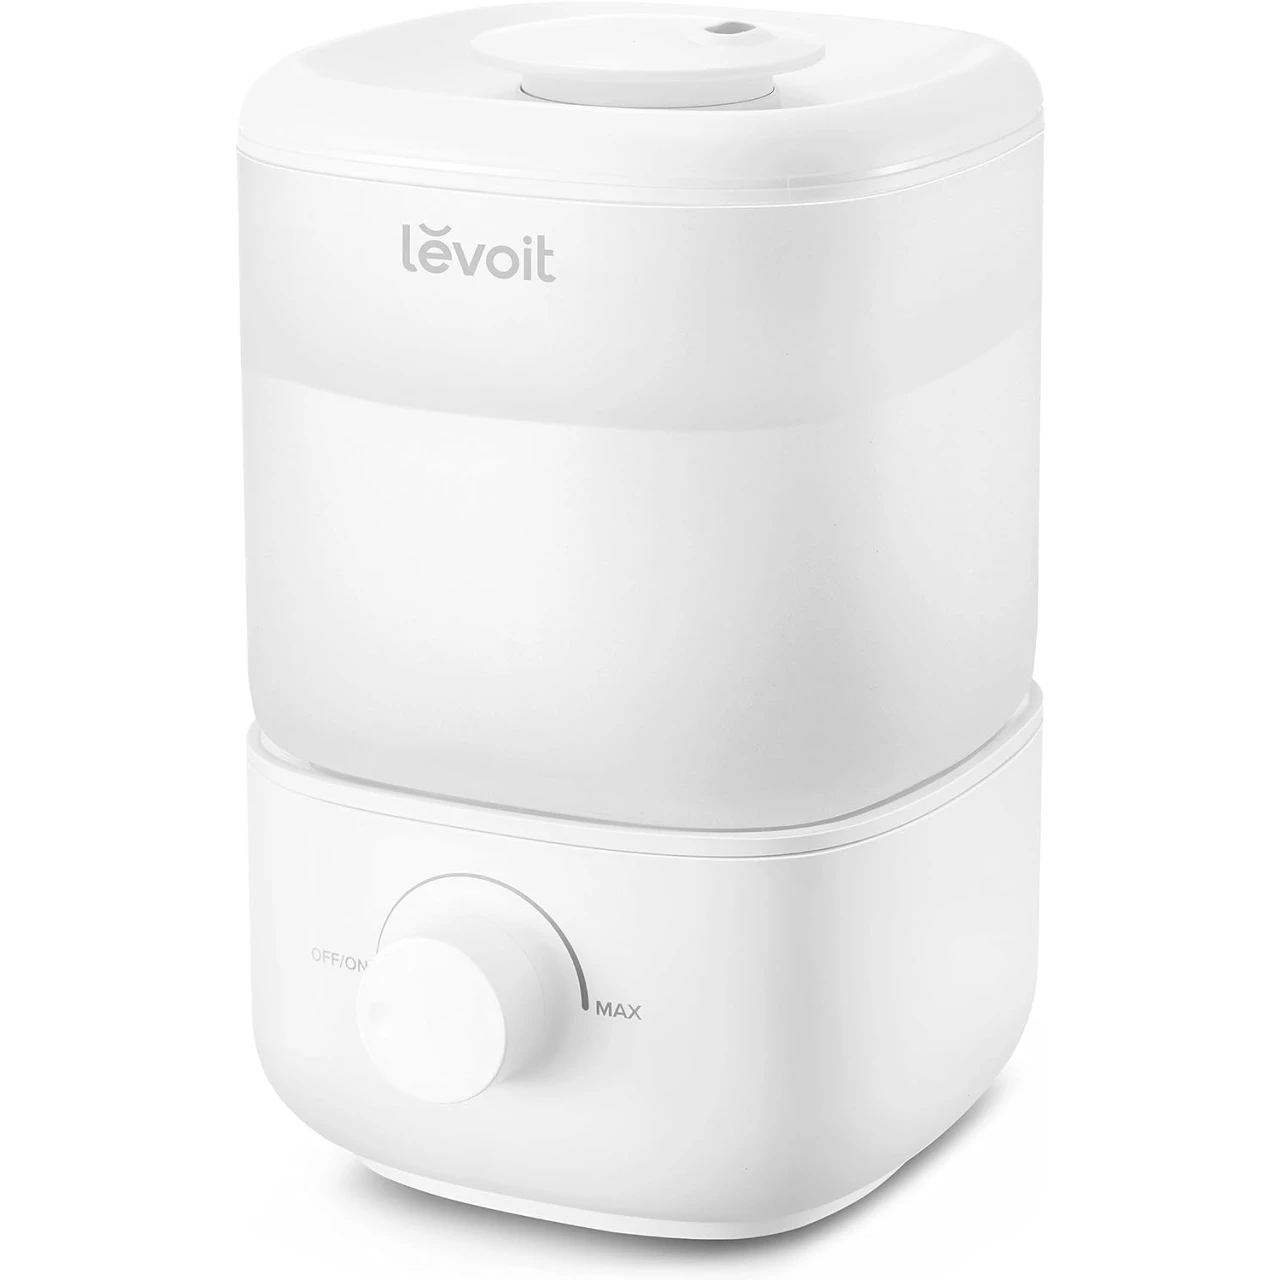 LEVOIT Top Fill Humidifiers for Bedroom (2.5L Large Tank), Cool Mist Ultrasonic Air Humidifier for Home Baby Nursery &amp; Plants, Auto Shut-off and BPA-Free for Safety, Quiet, Knob Control, 360° Nozzle